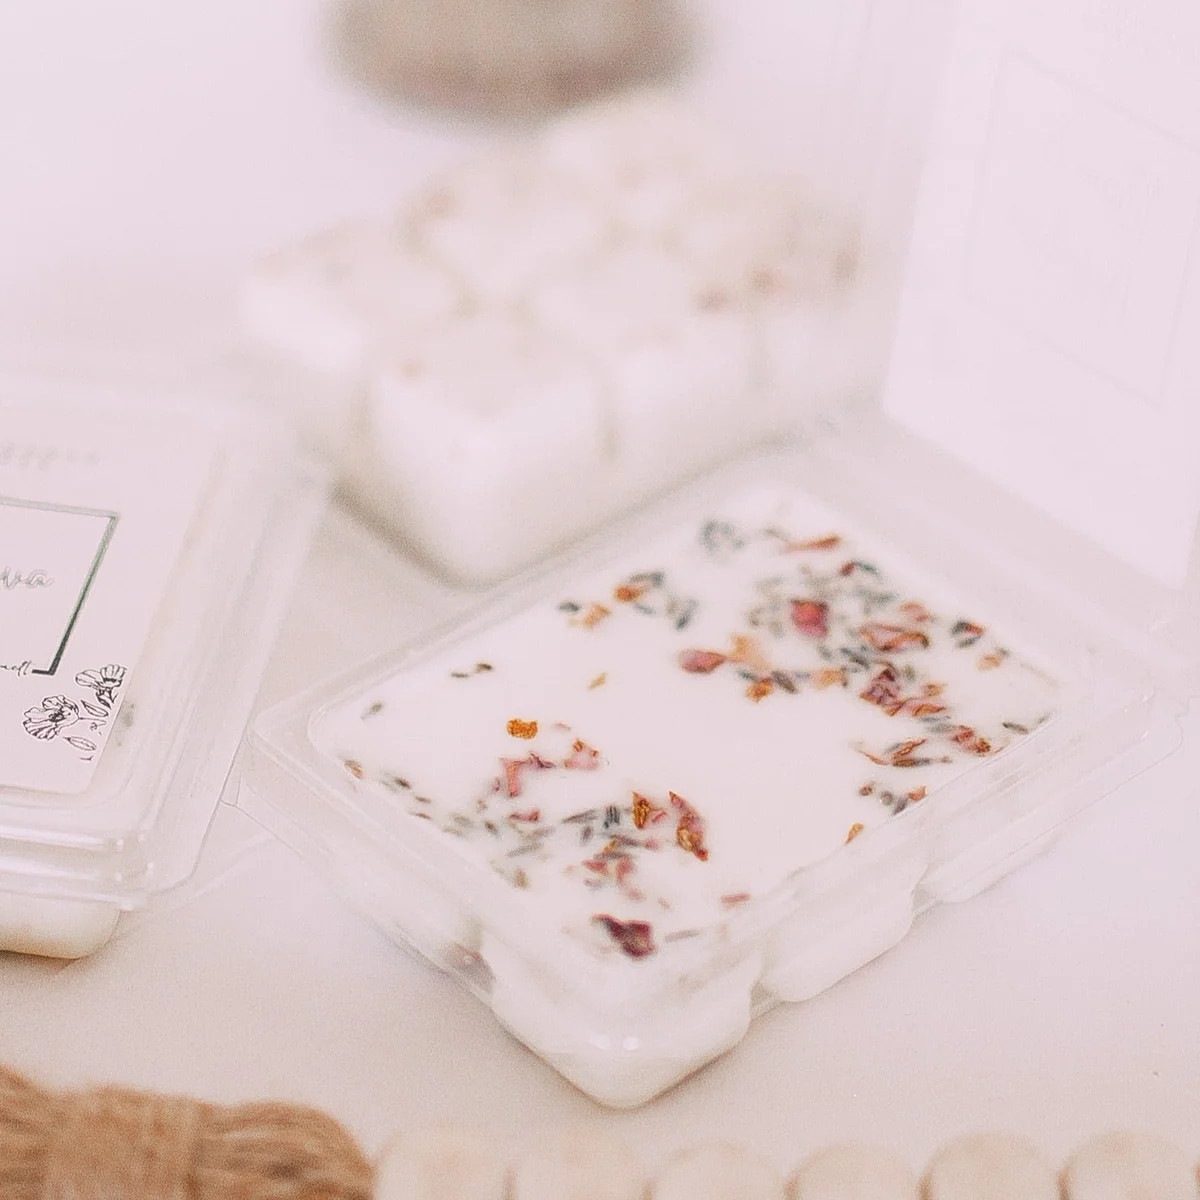 Clamshell Wax Melts | Abandoned Cakes